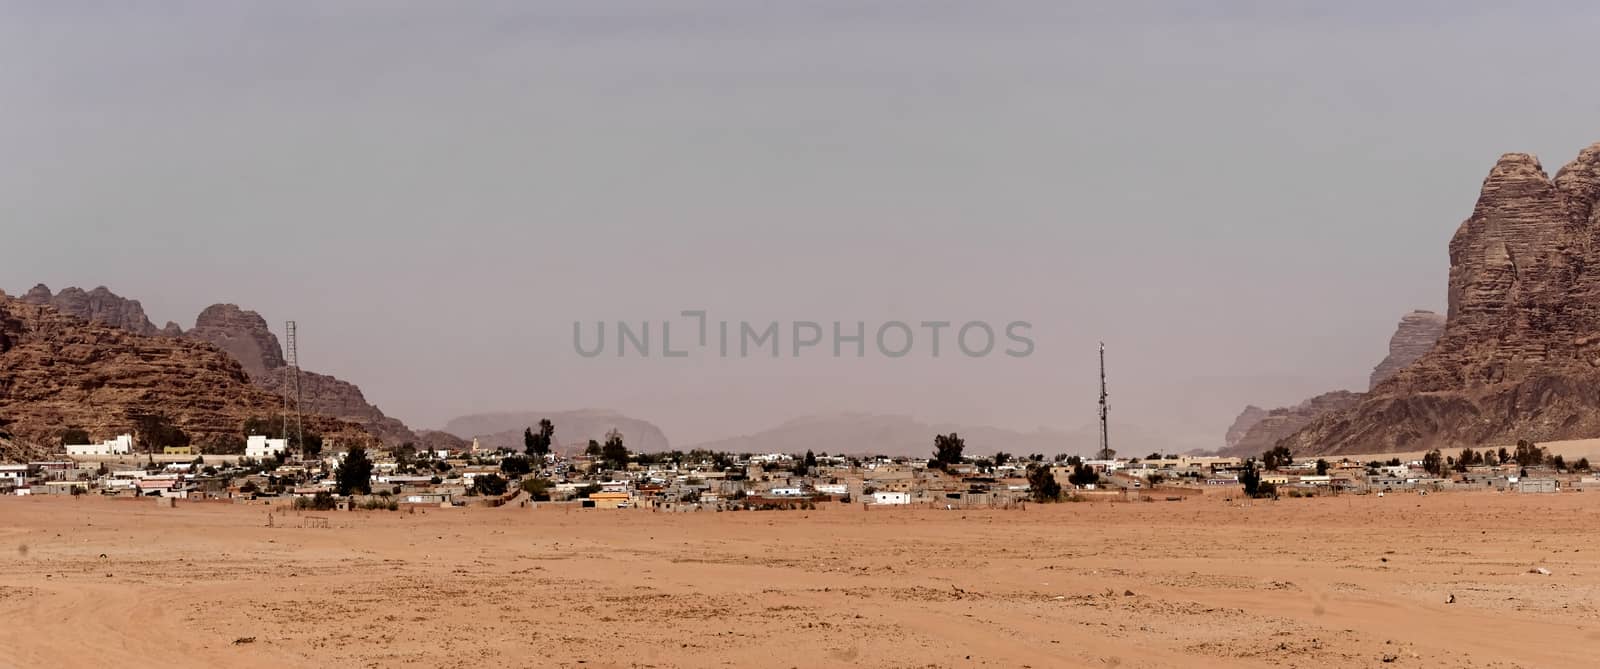 Overview and panorama of the Bedouin village "Wadi Rum Village" on the edge of the Wadi Rum Nature Reserve, Jordan, middle east